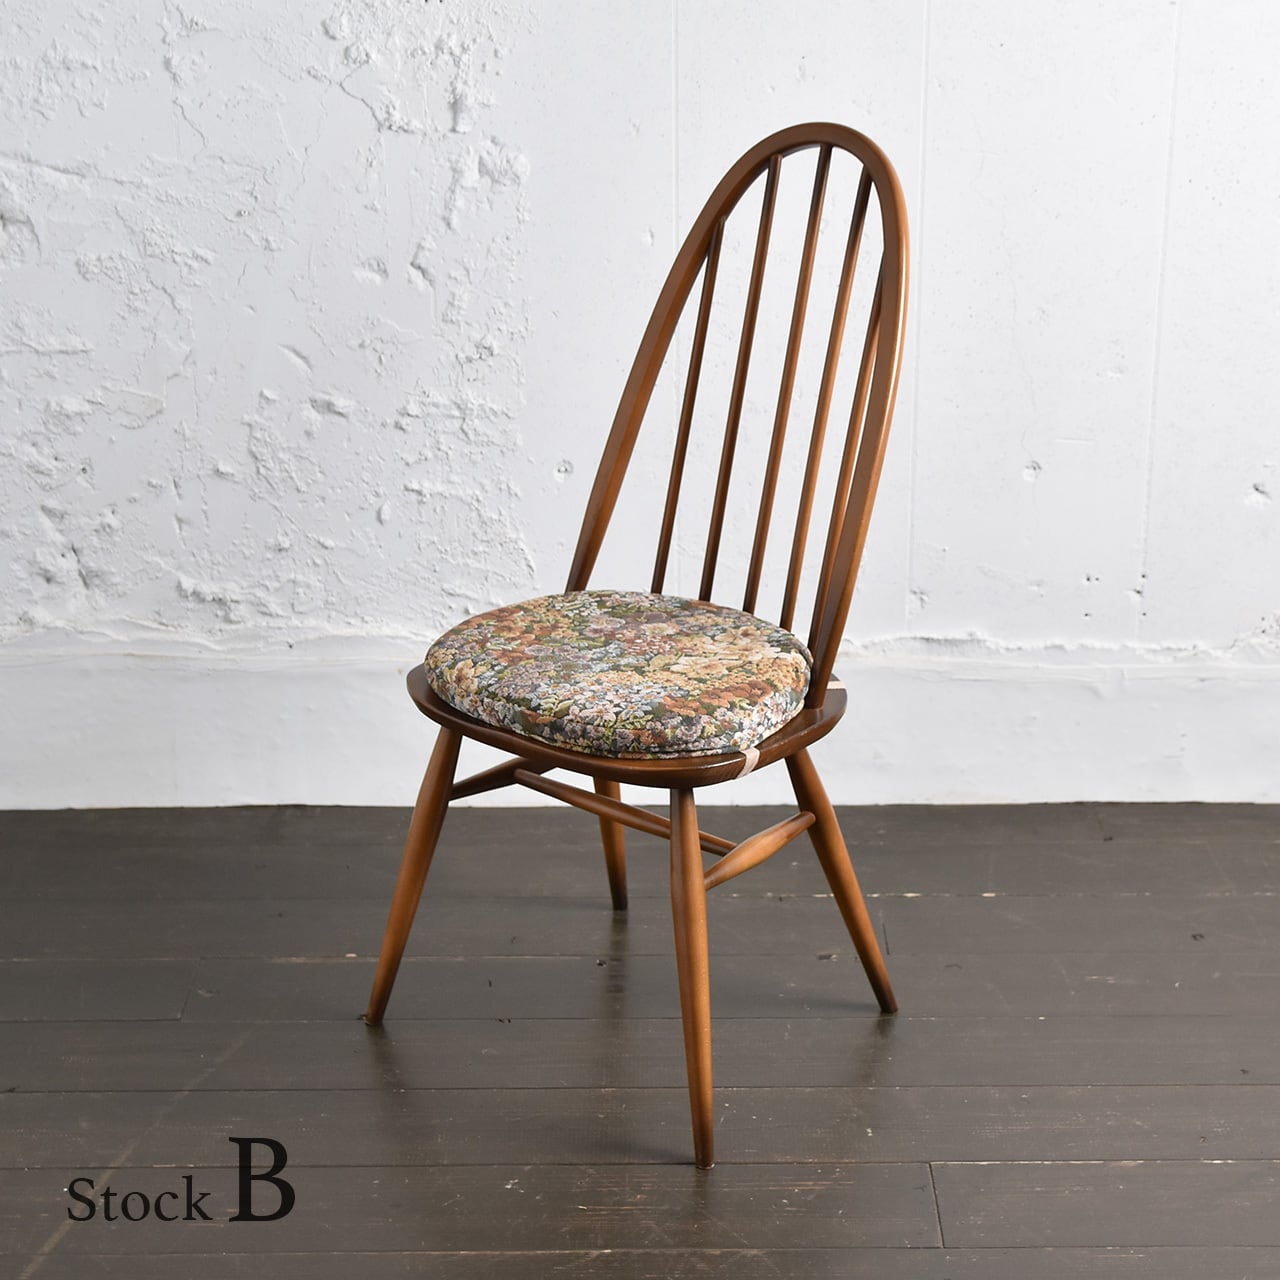 Ercol Quaker Chair (BR)【B】 / アーコール クエーカー チェア